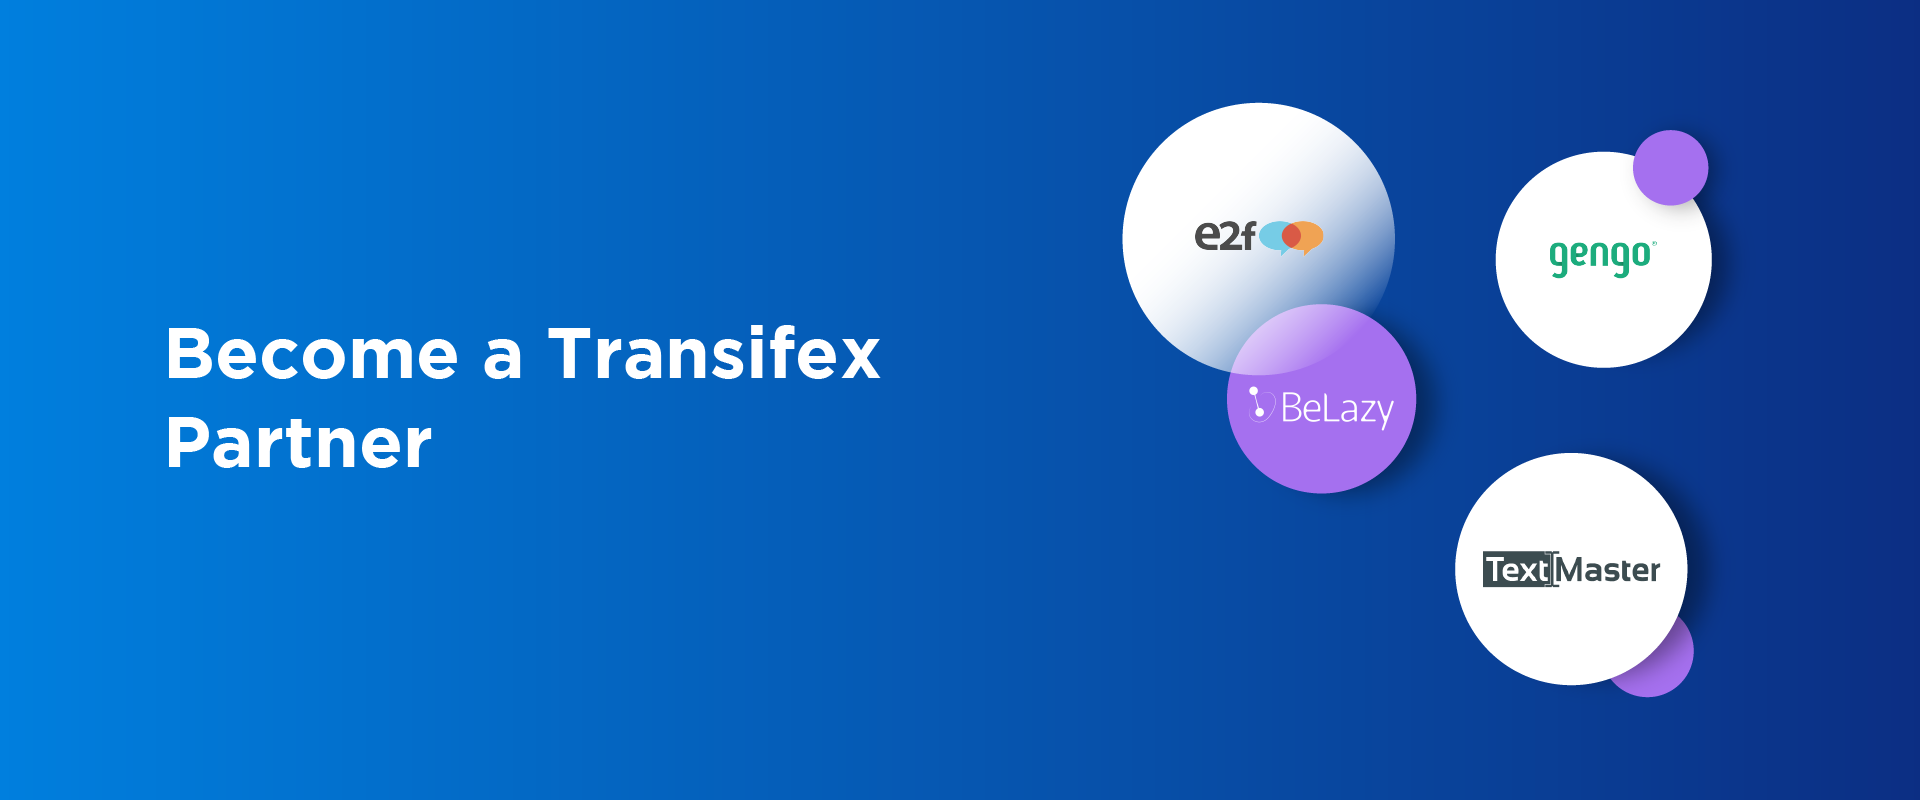 Become a Transifex Partner